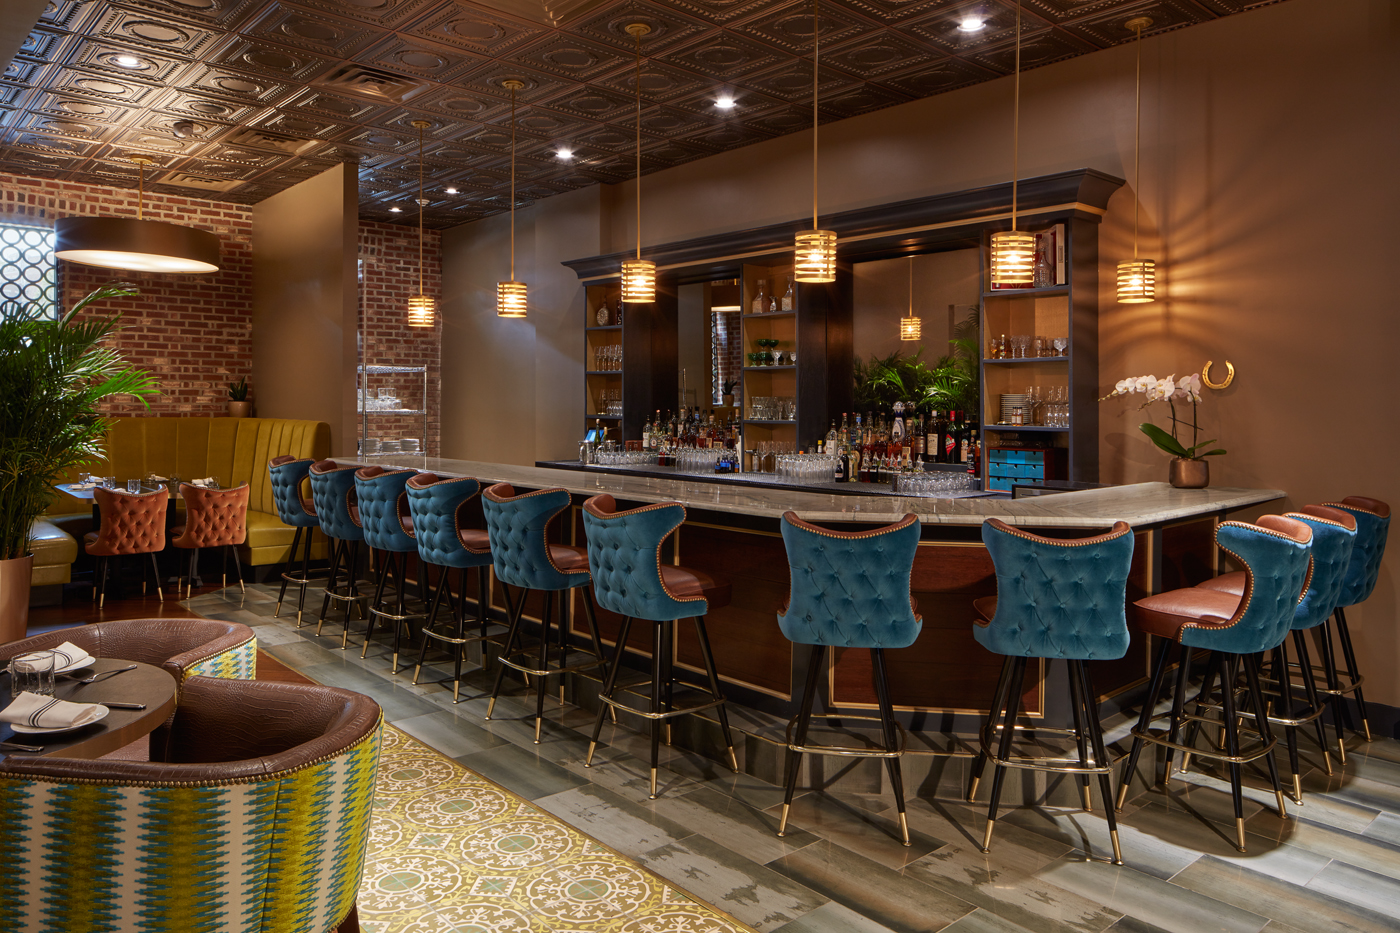 Tapestry: Club Room, bar and banquette seating. Designed by Dyer Brown. (Photo by Jared Kuzia, courtesy Dyer Brown)